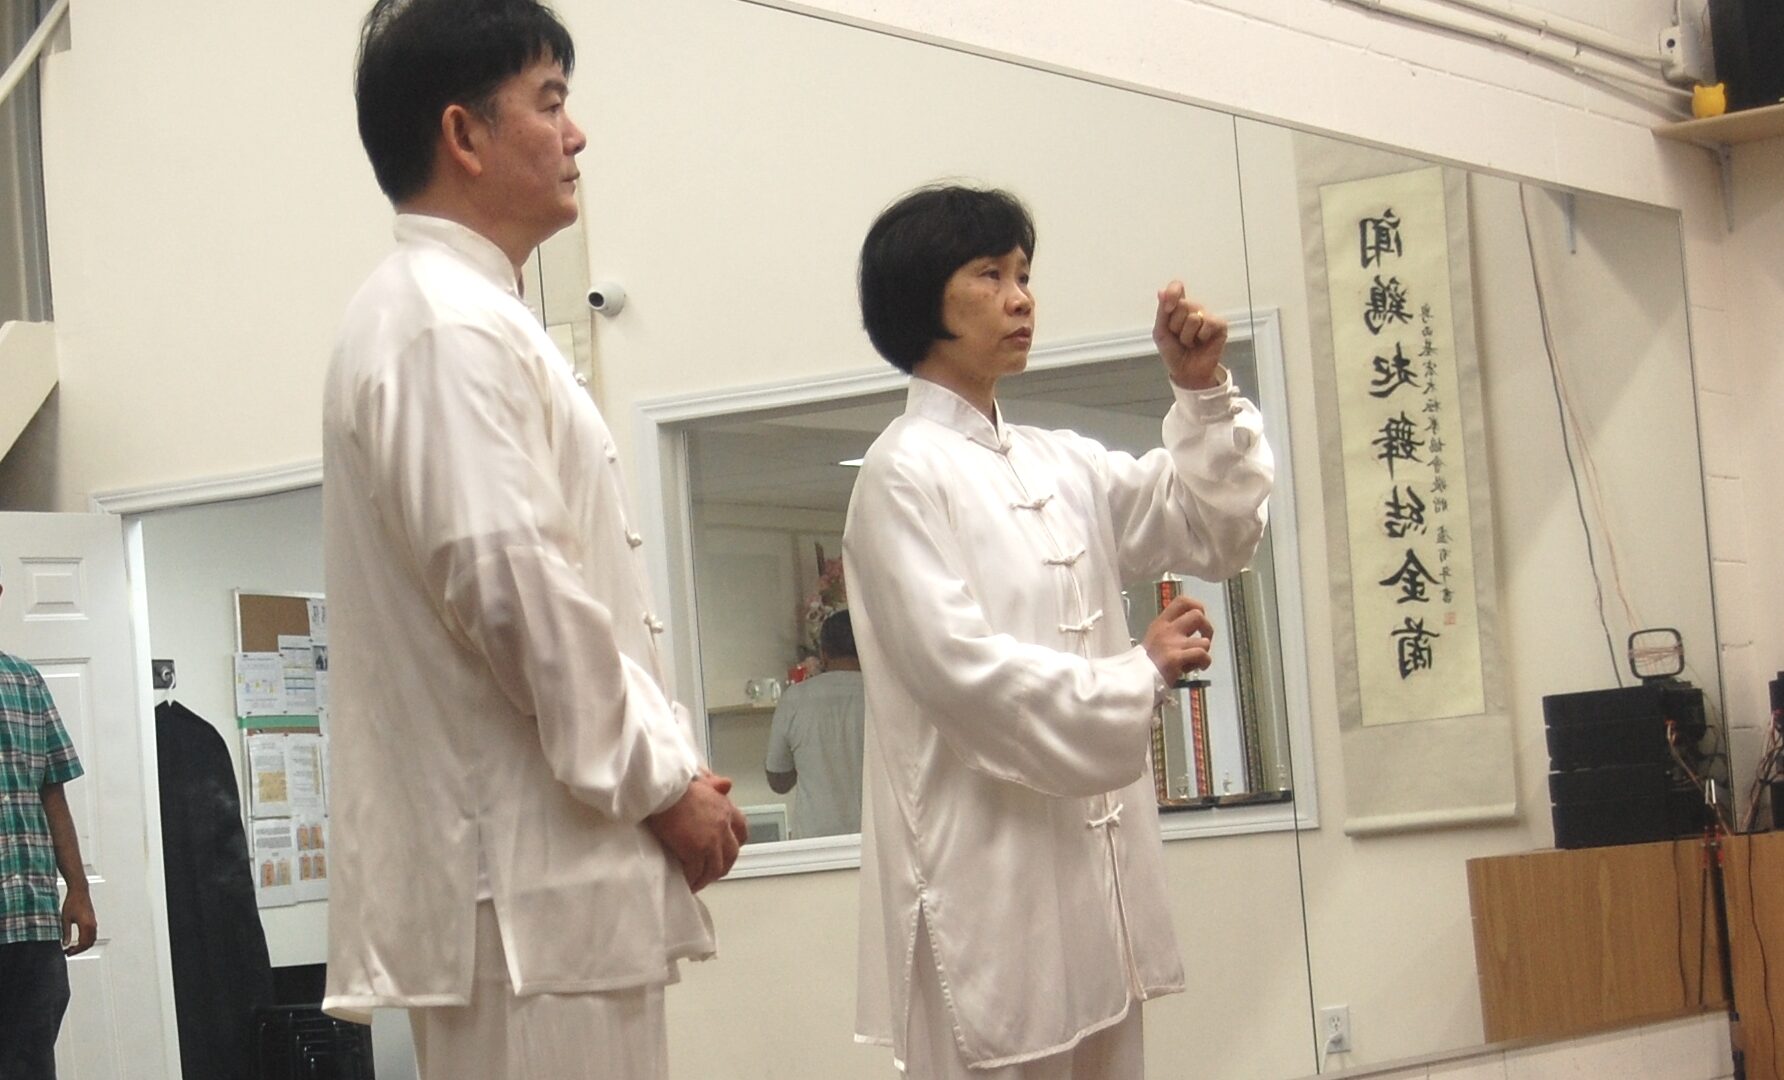 What to Look for in a Great Tai Chi Teacher